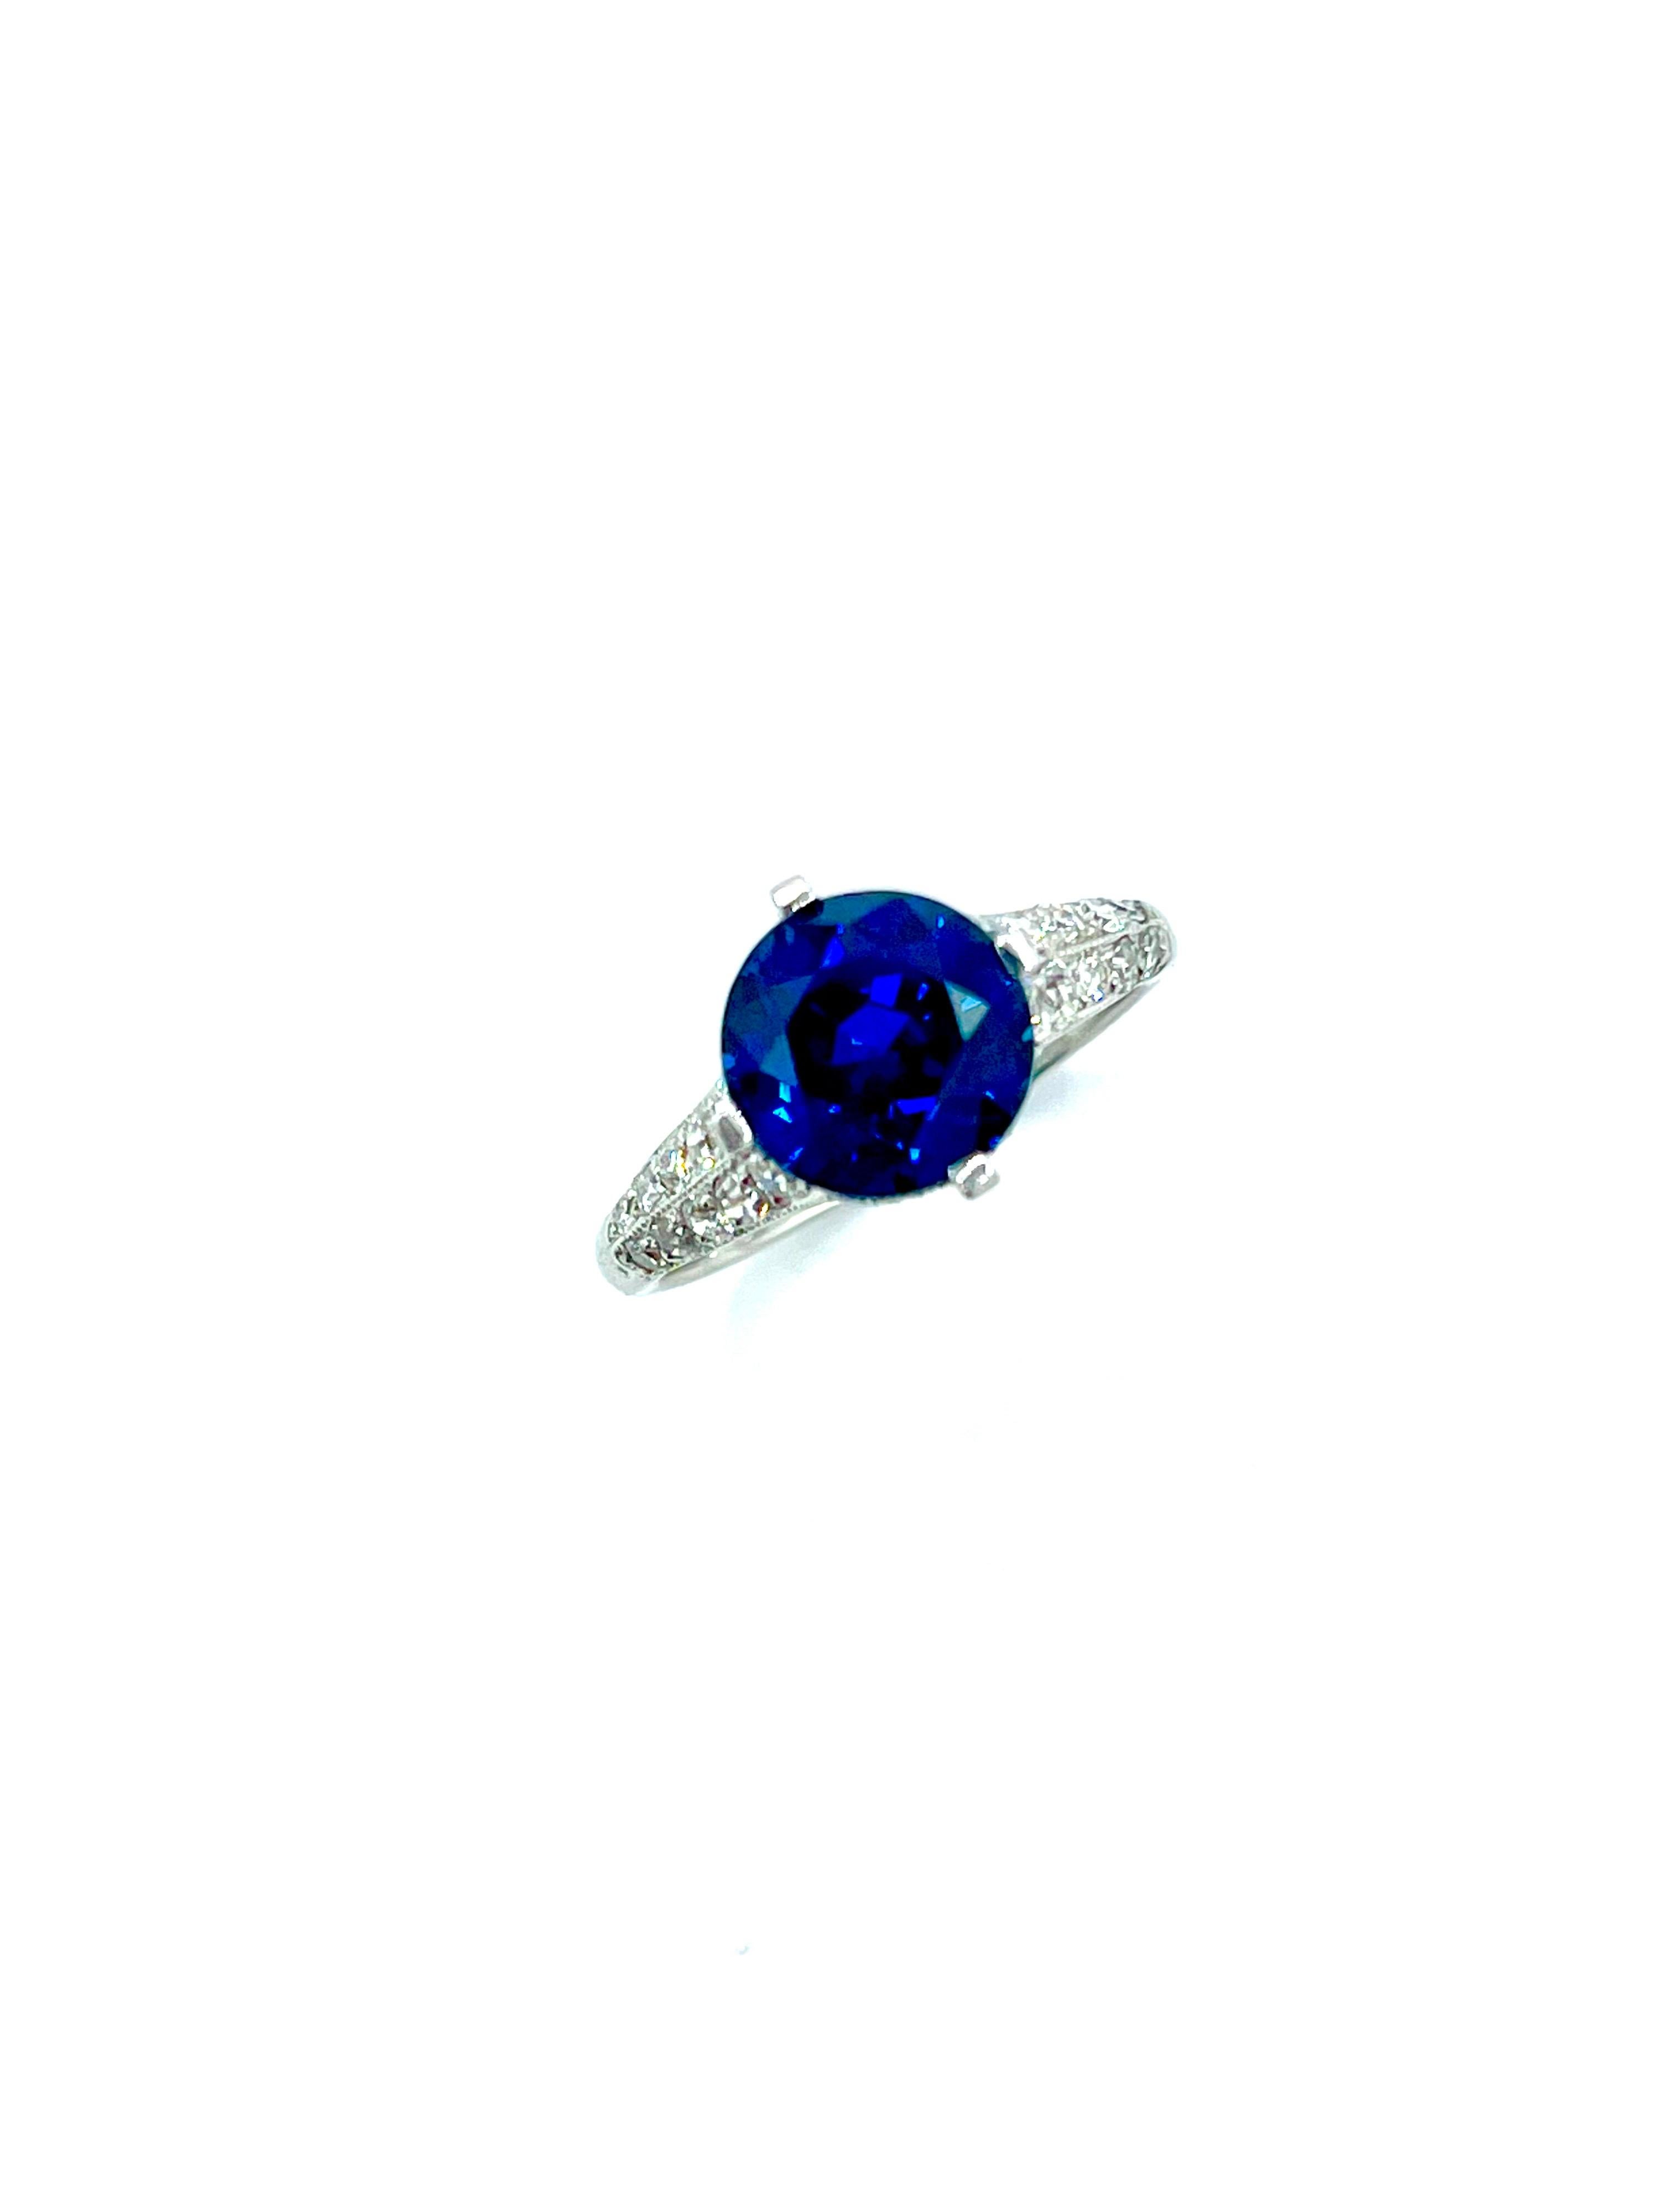 This Sapphire is stunning!  The round Sapphire is set with four prongs, sitting atop a gallery of old European cut and single cut Diamonds, and a double row Diamond half shank.  It is rare to find a sapphire of such a beautiful color in a round